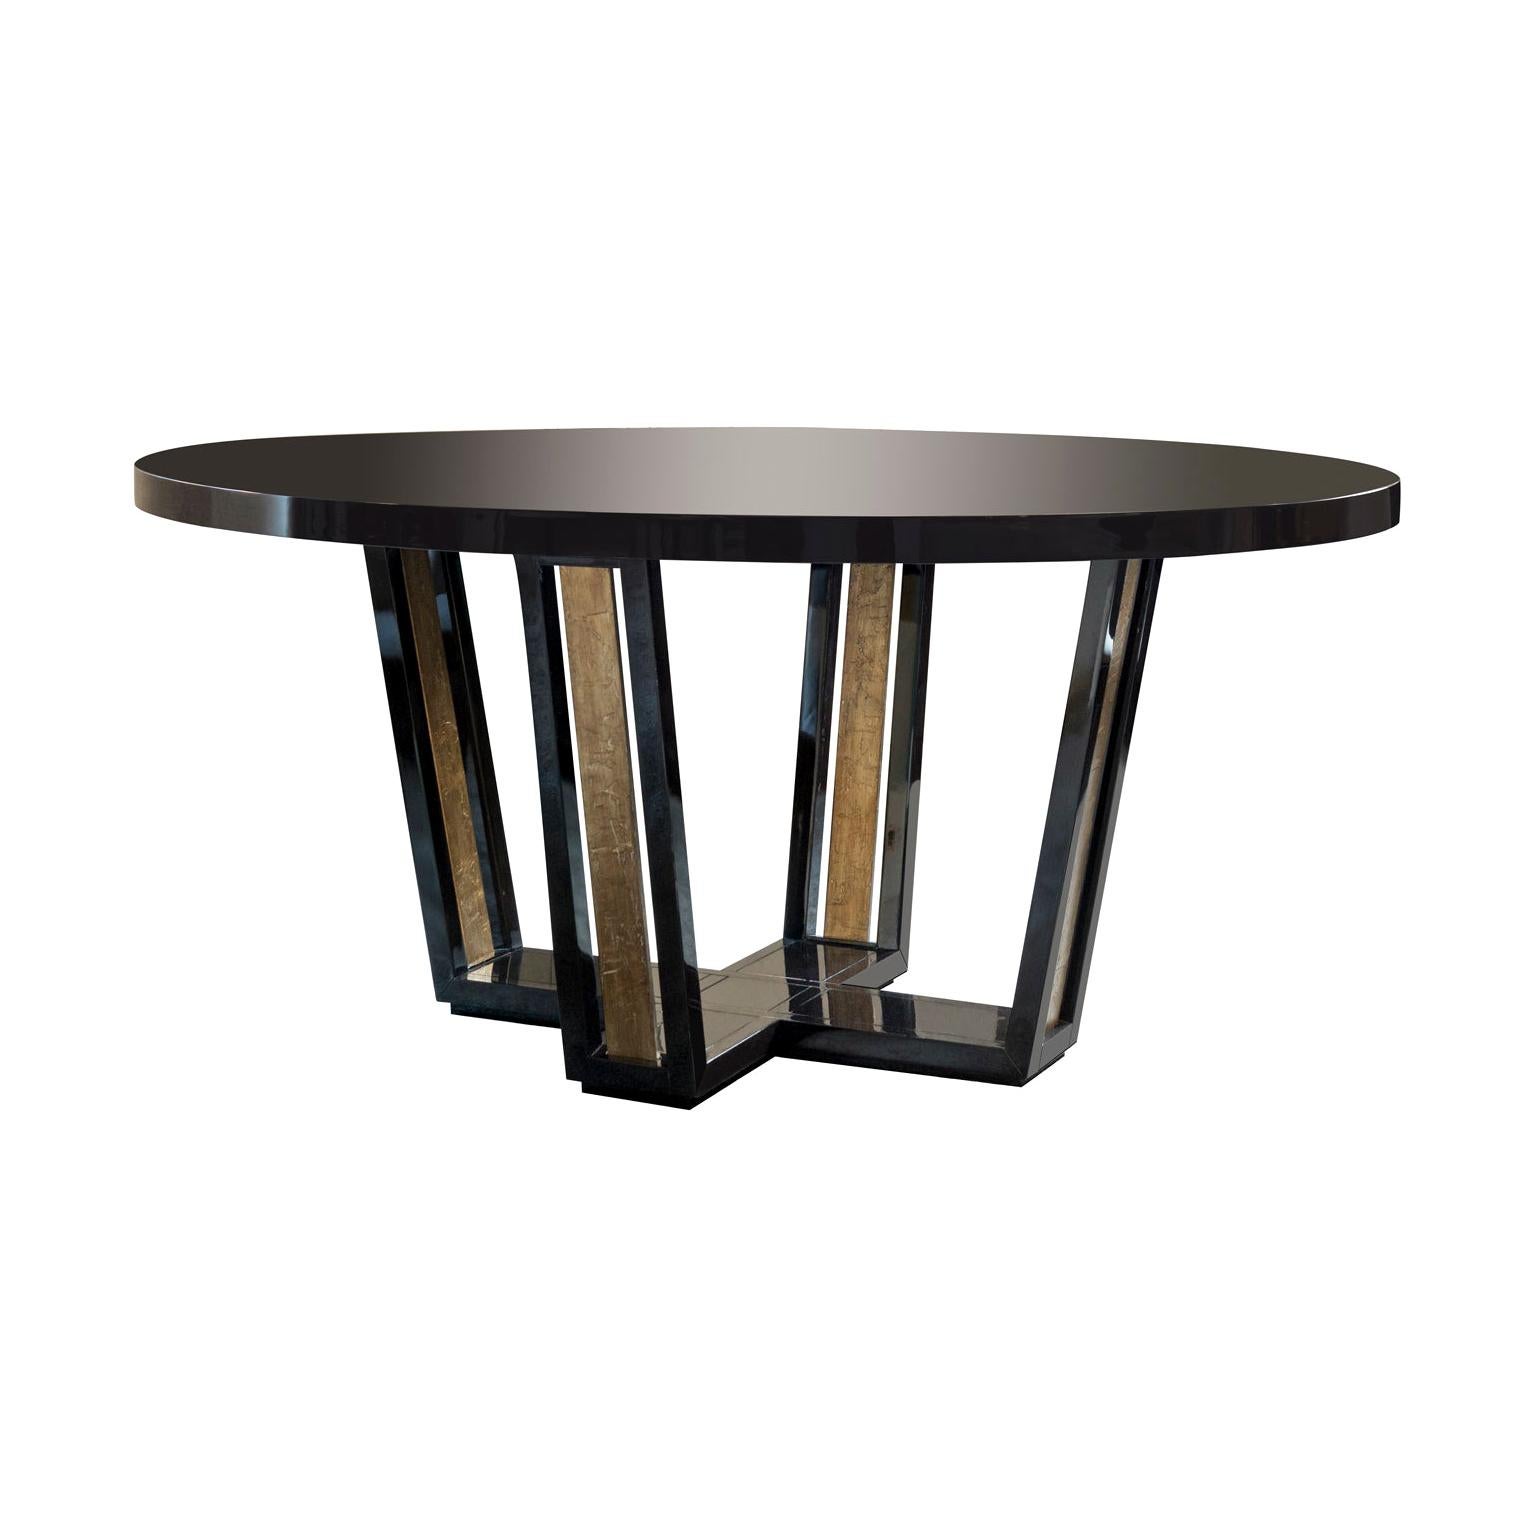 Isabella Costantini, Italy, Cleofe Oval Dining Table For Sale